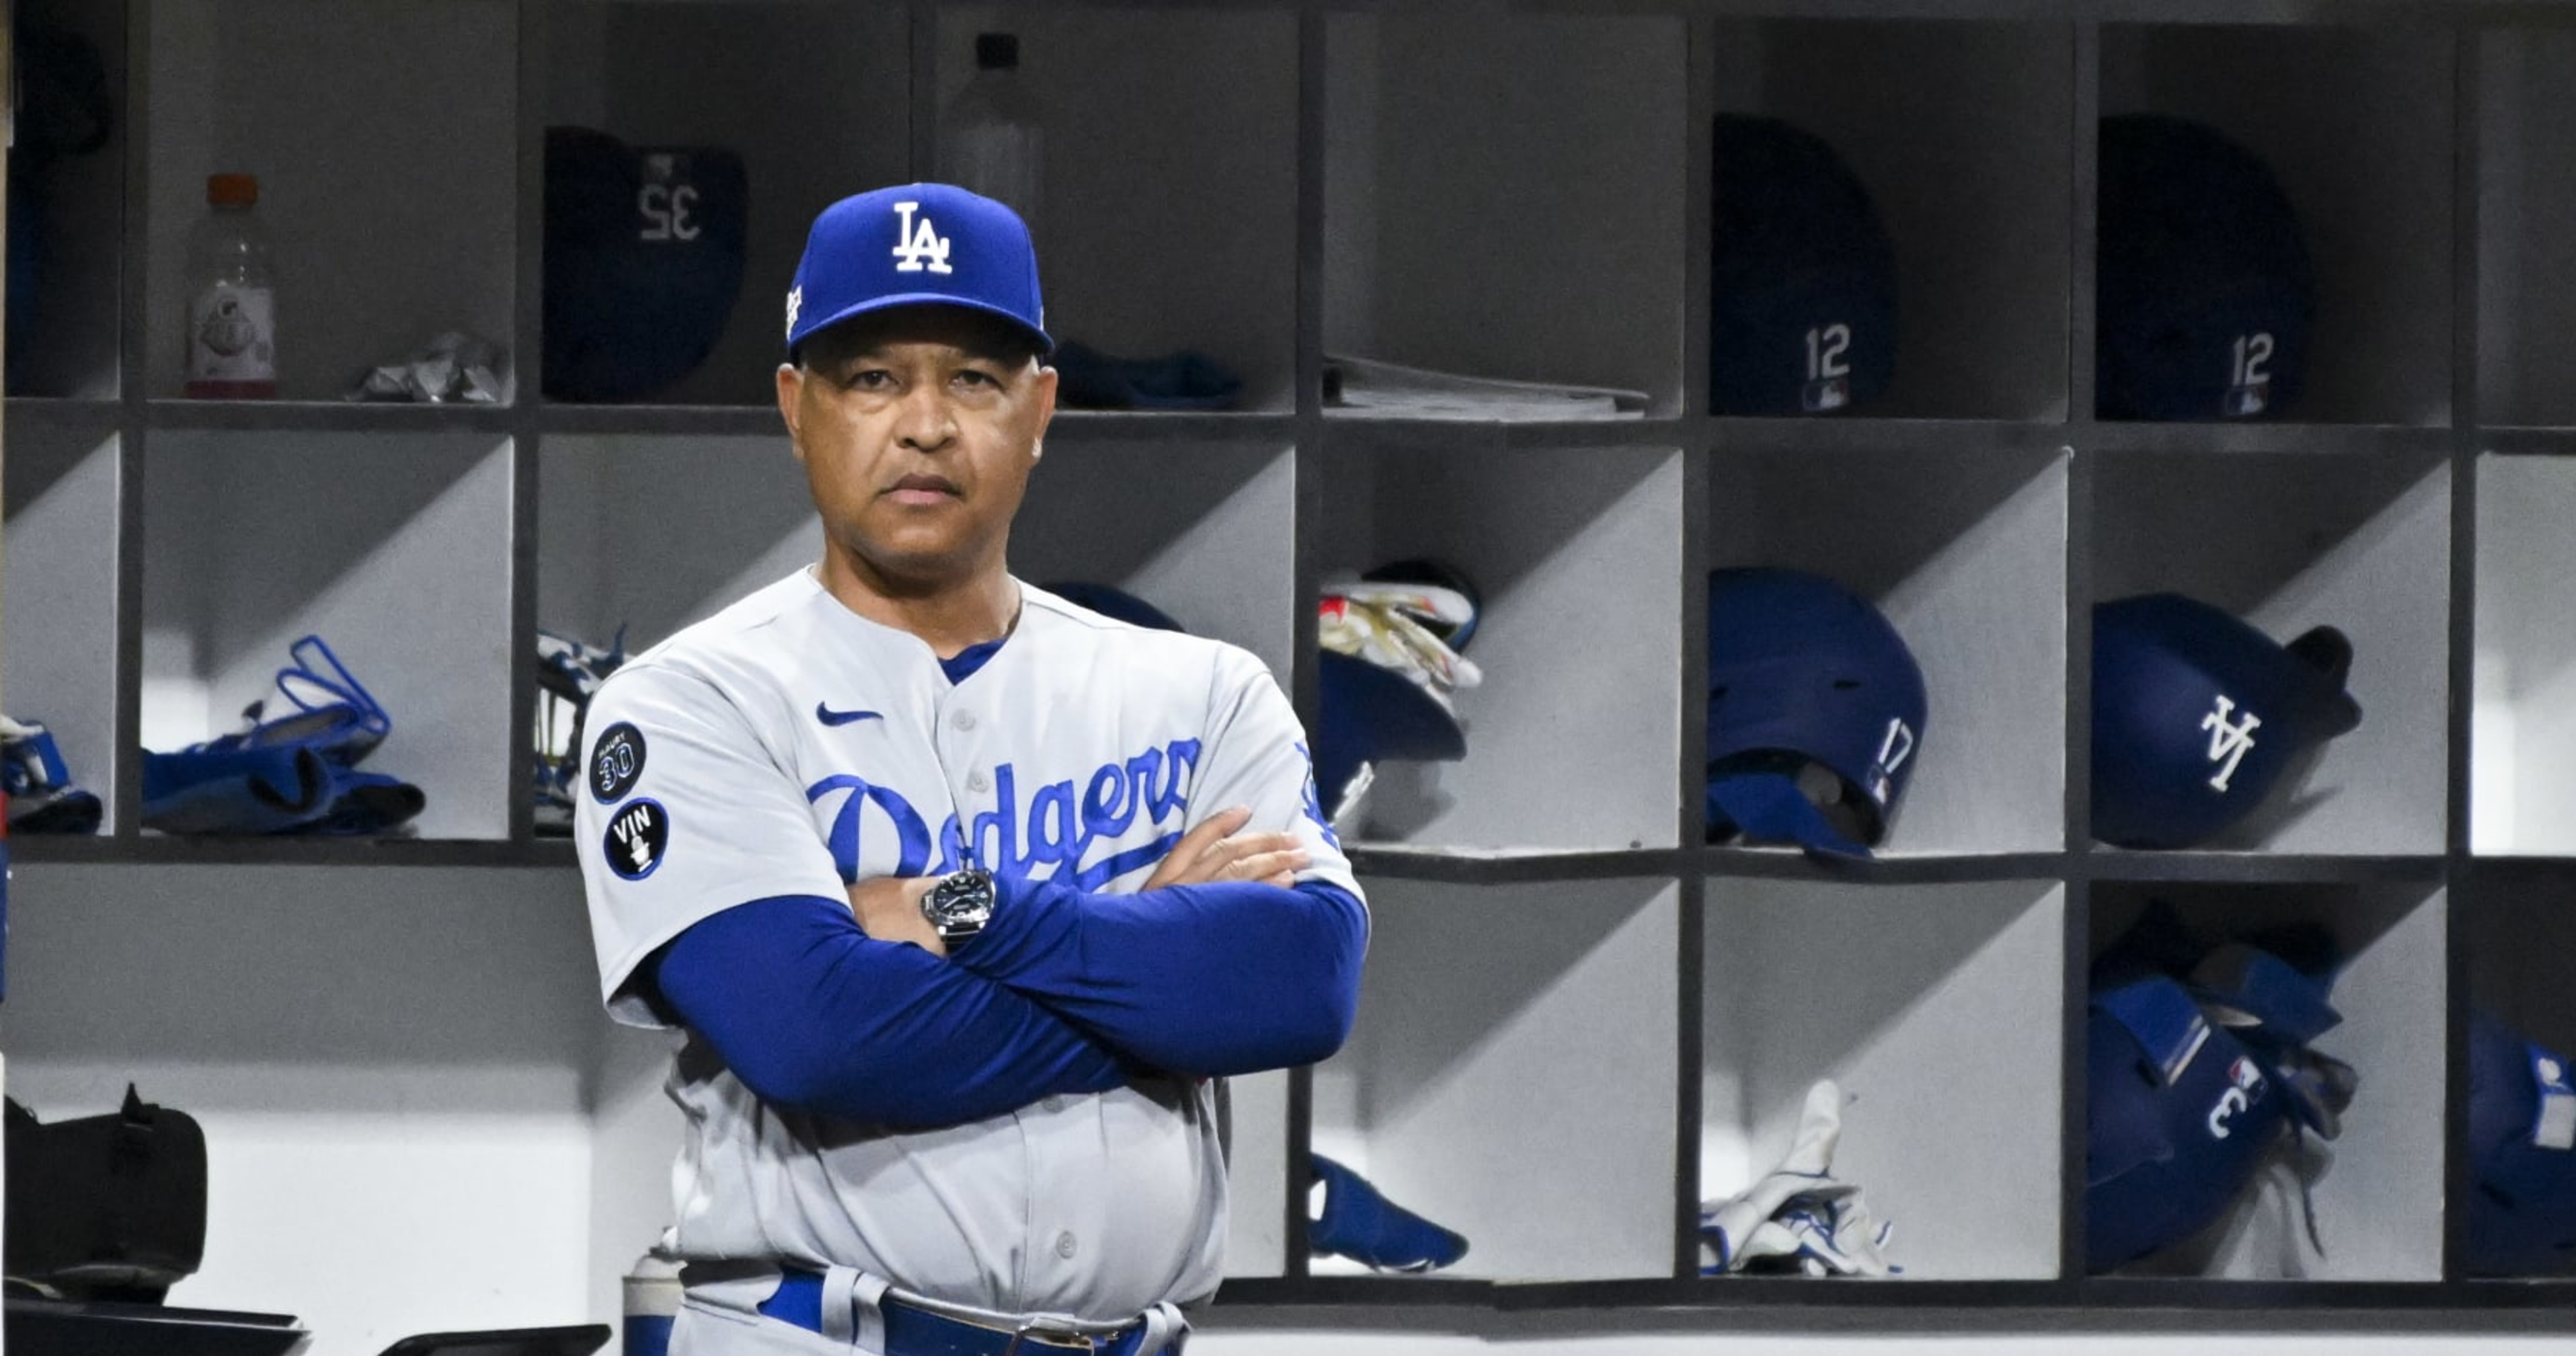 Dodgers Rumors: Dave Roberts Expected to Return for 2023 Season After NLDS Loss